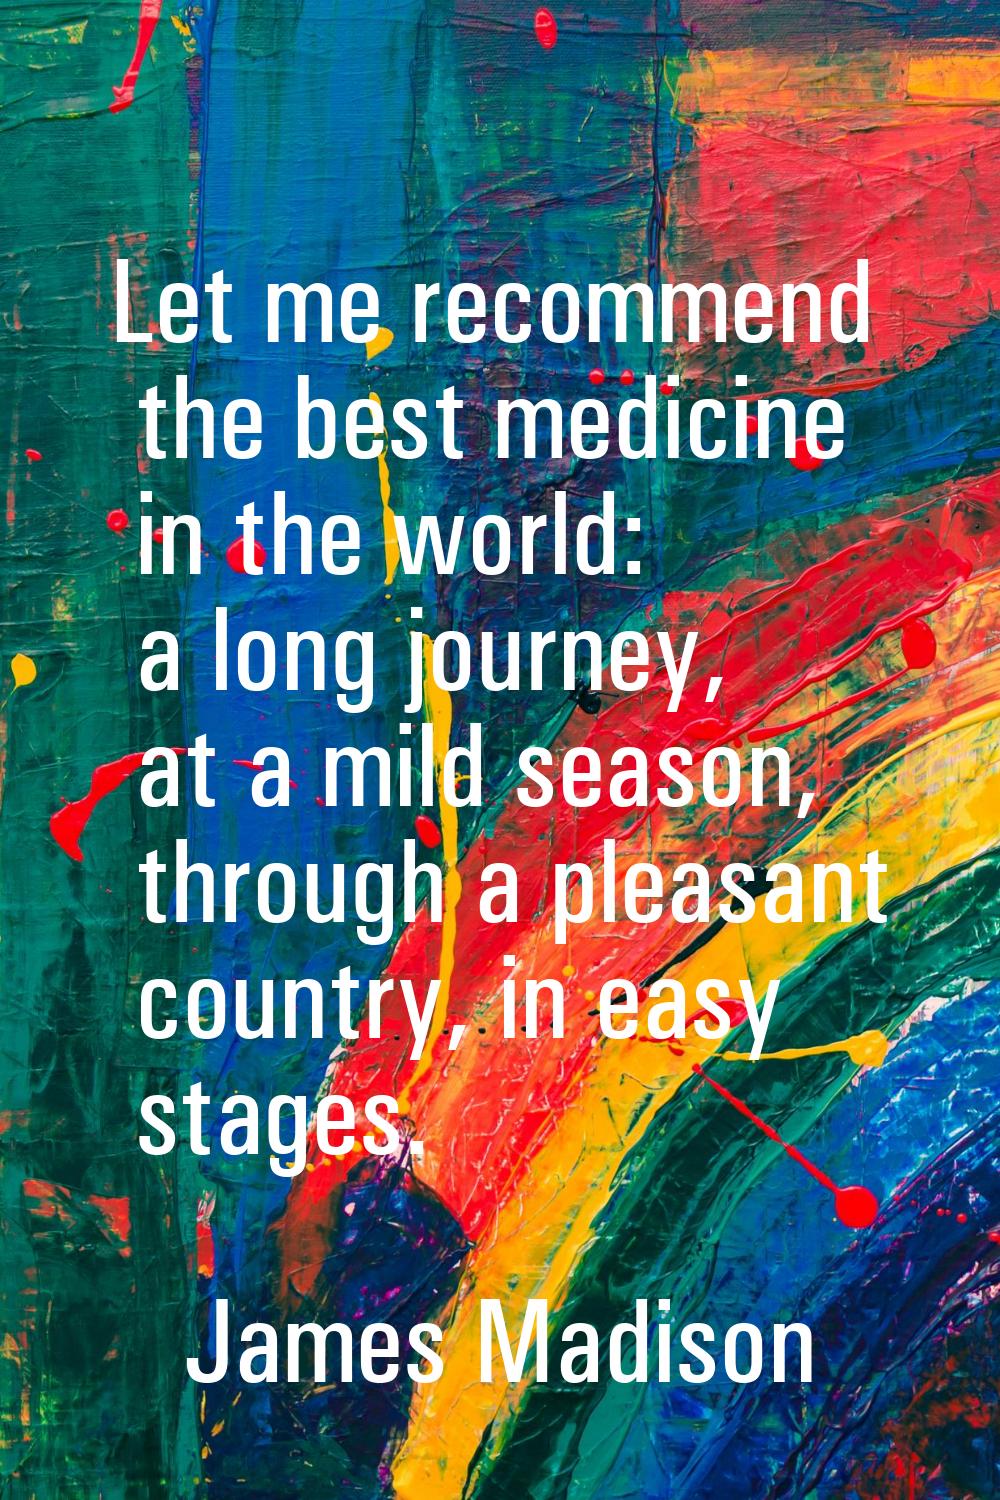 Let me recommend the best medicine in the world: a long journey, at a mild season, through a pleasa